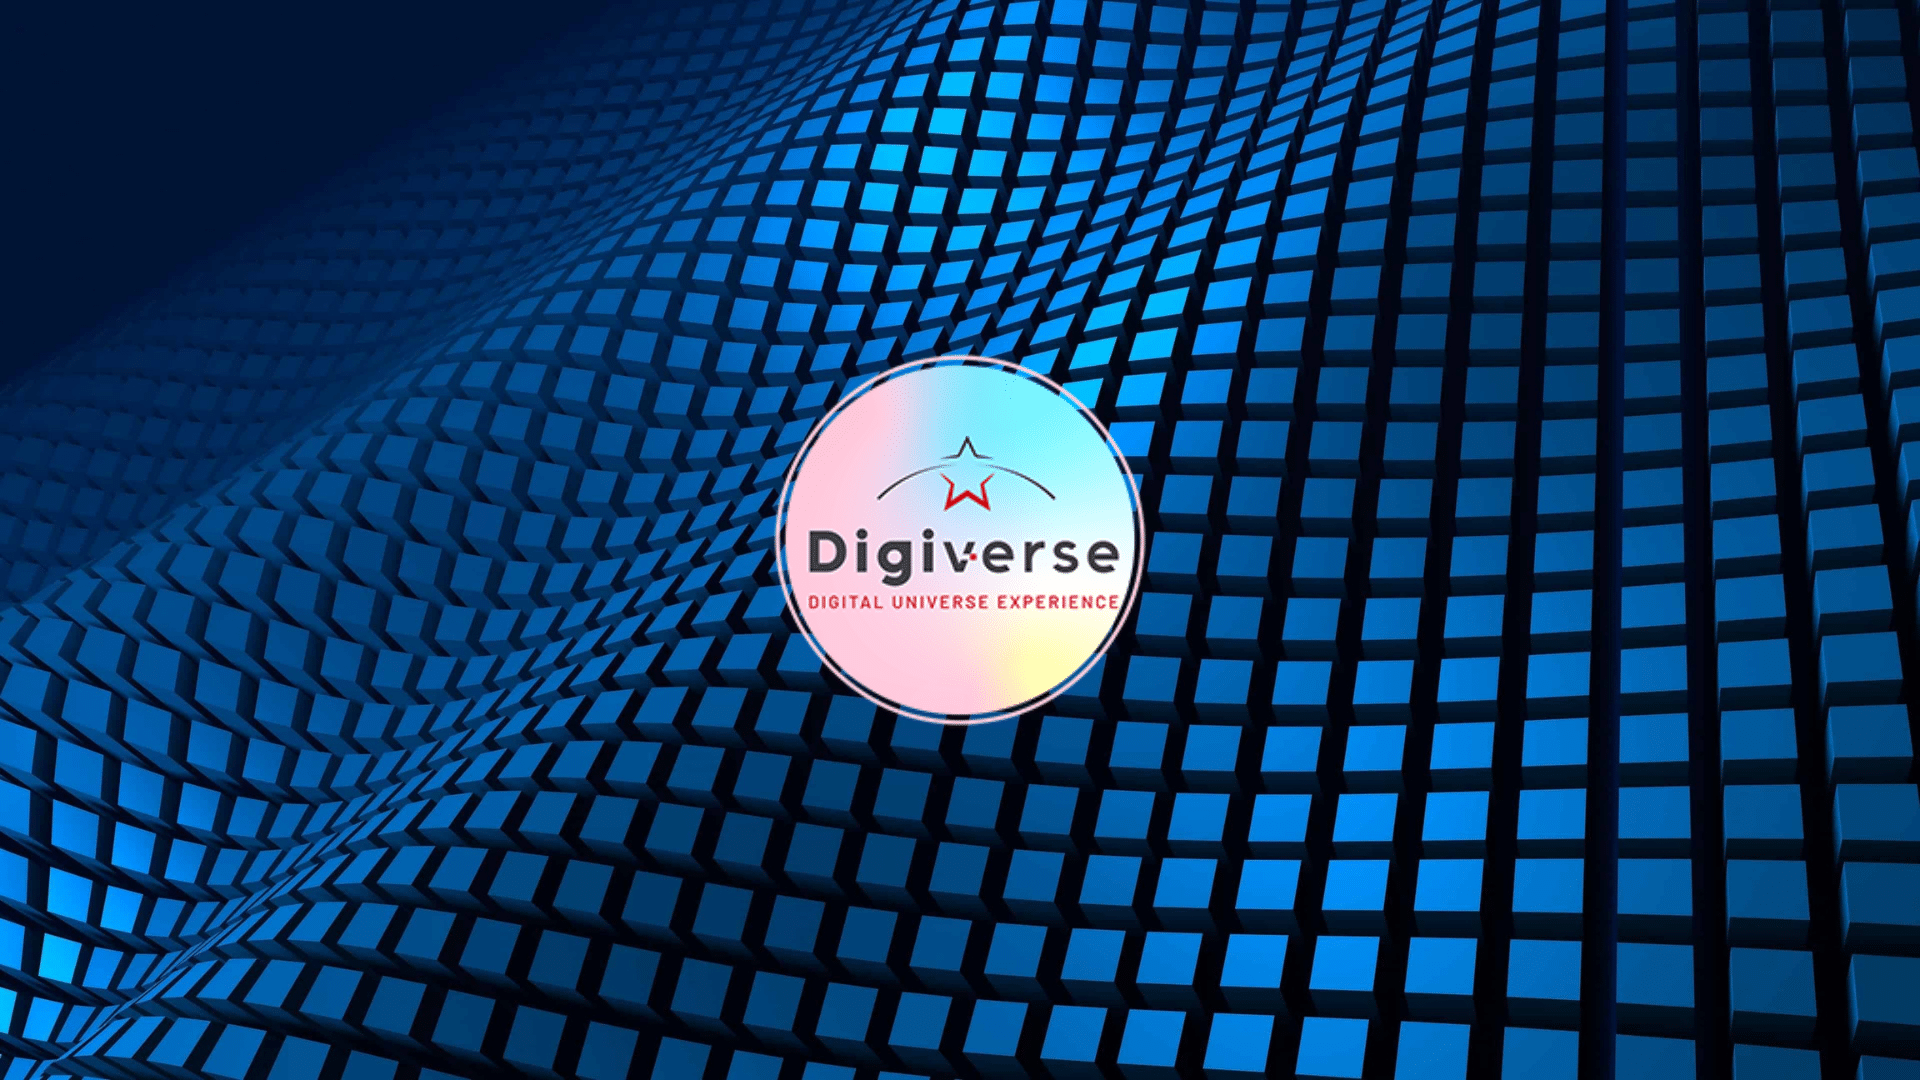 Digiverse Price Prediction: DIGI Drops 24% In A Month As Investors Pivot To This World-First AR/VR ICO That’s Charging Towards $5M